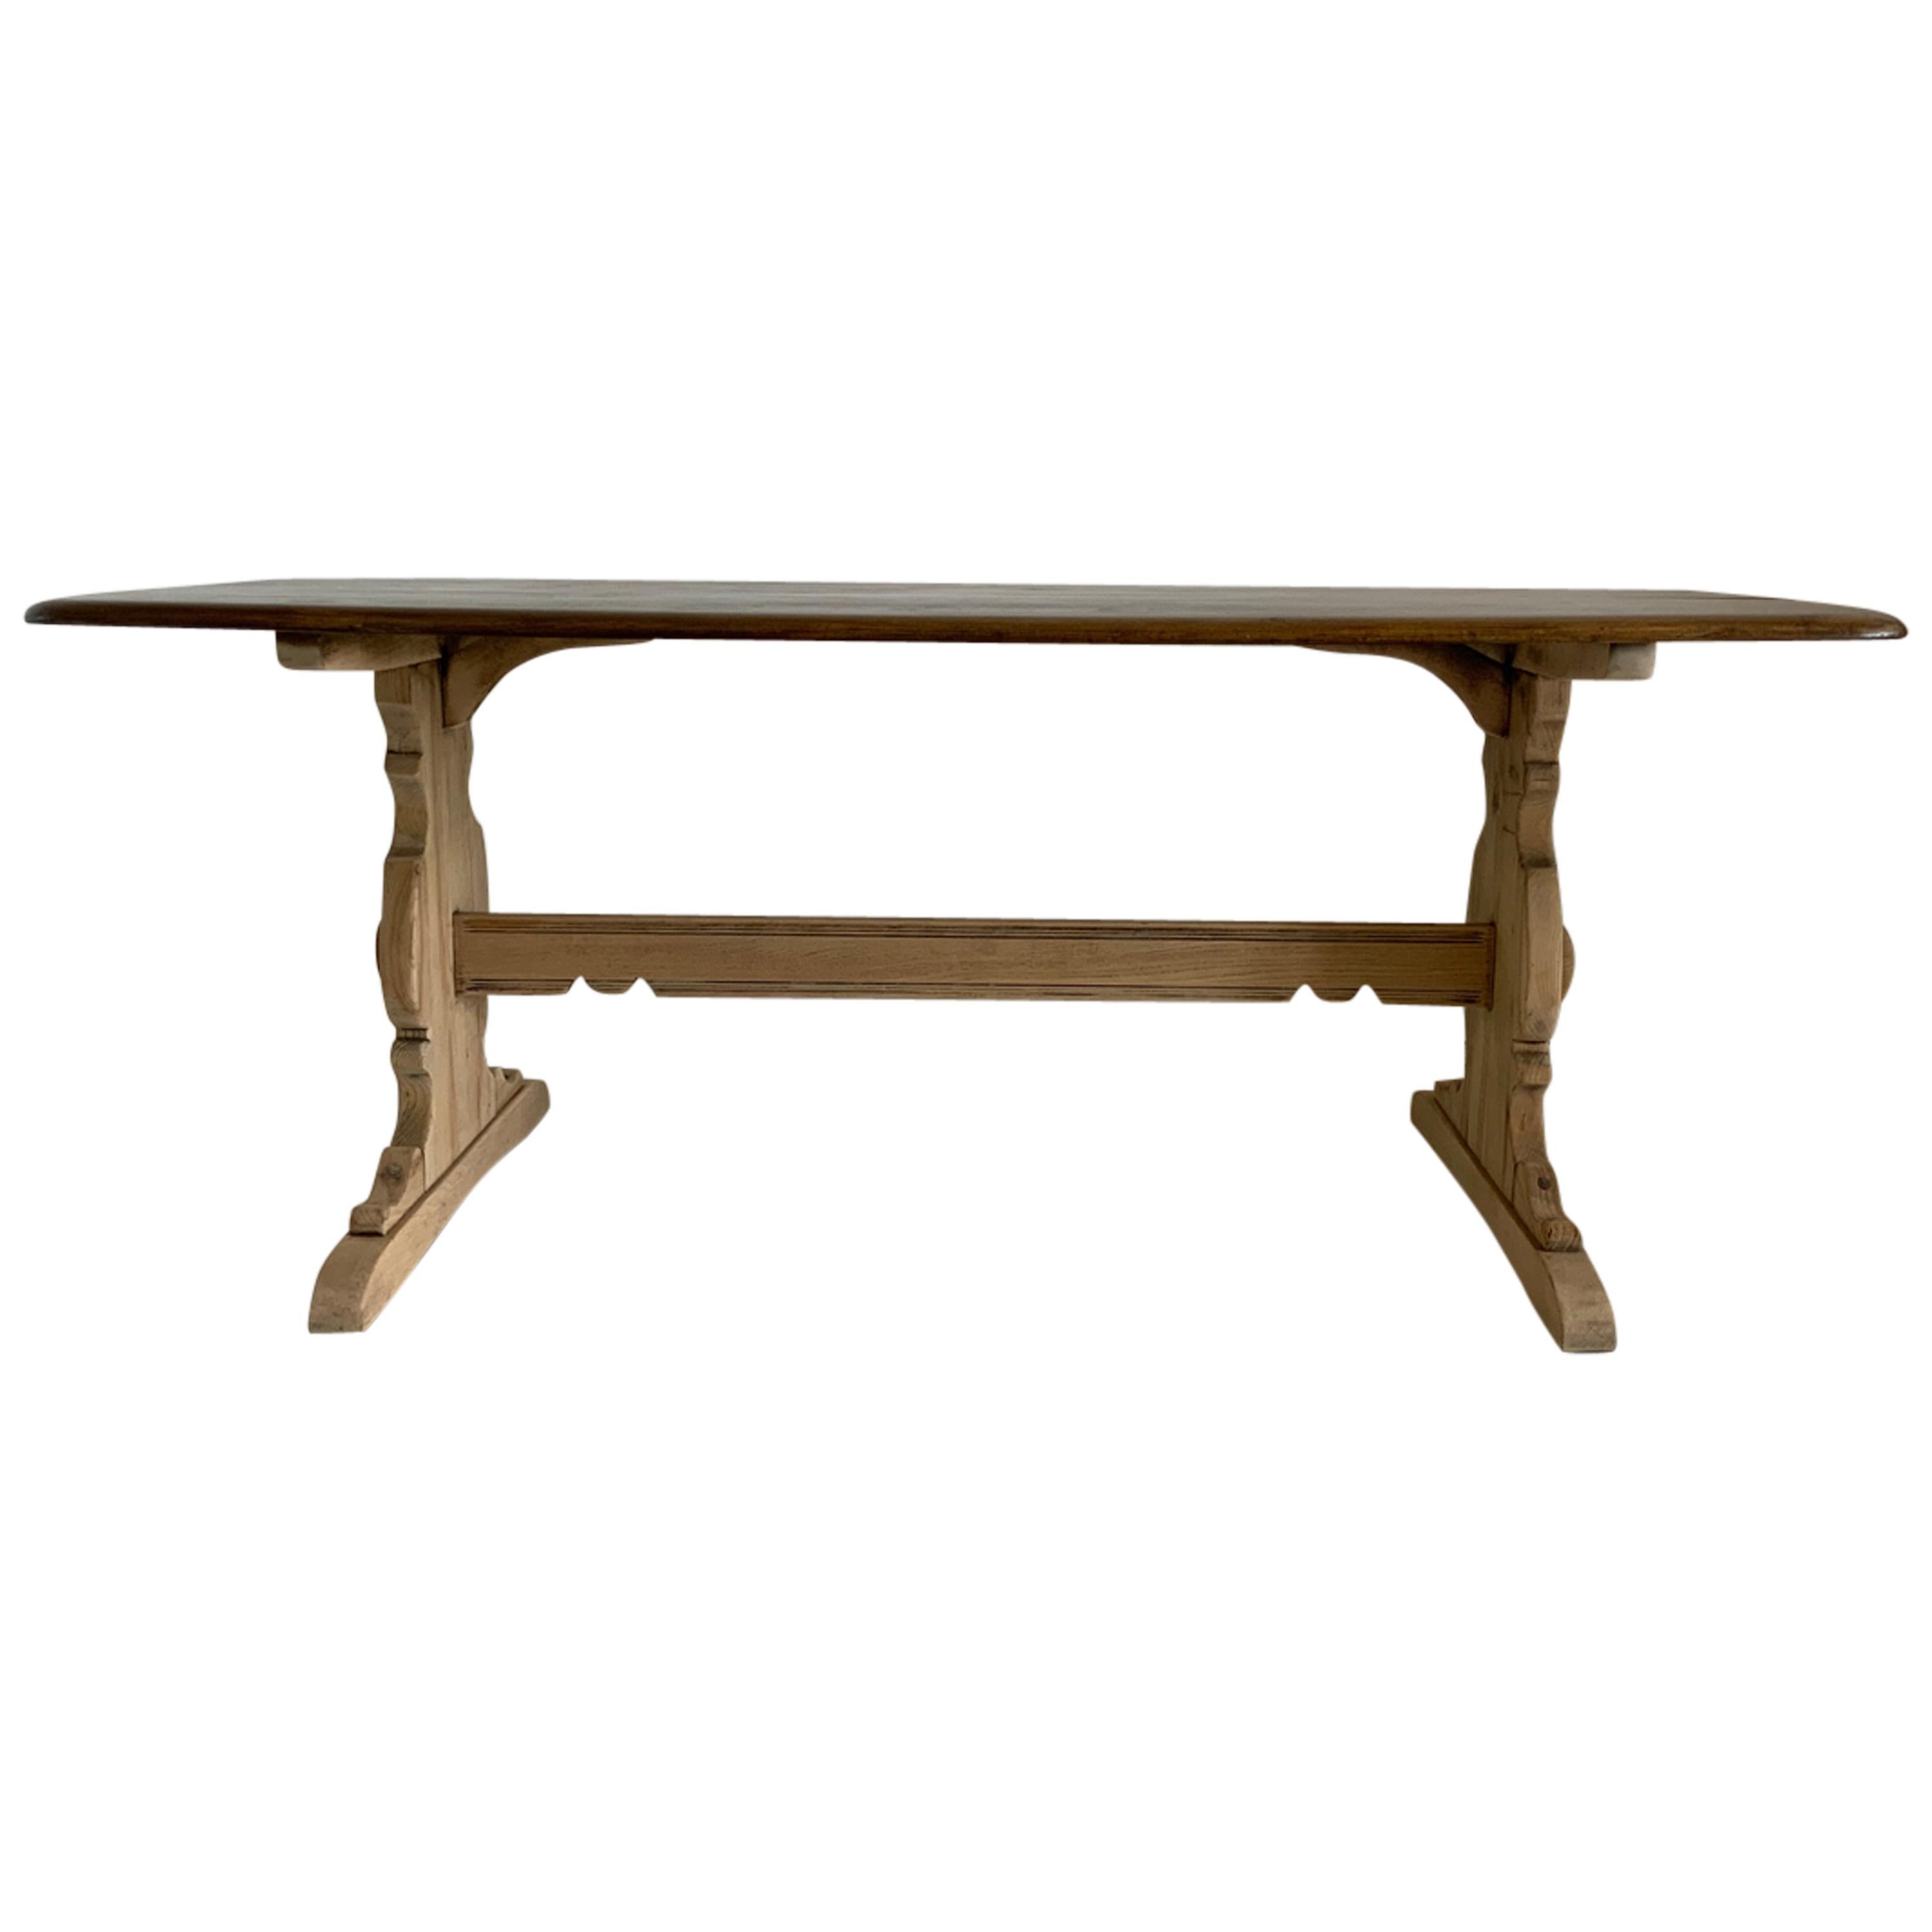 French Provencal Style, Farm Dining Table in Walnut